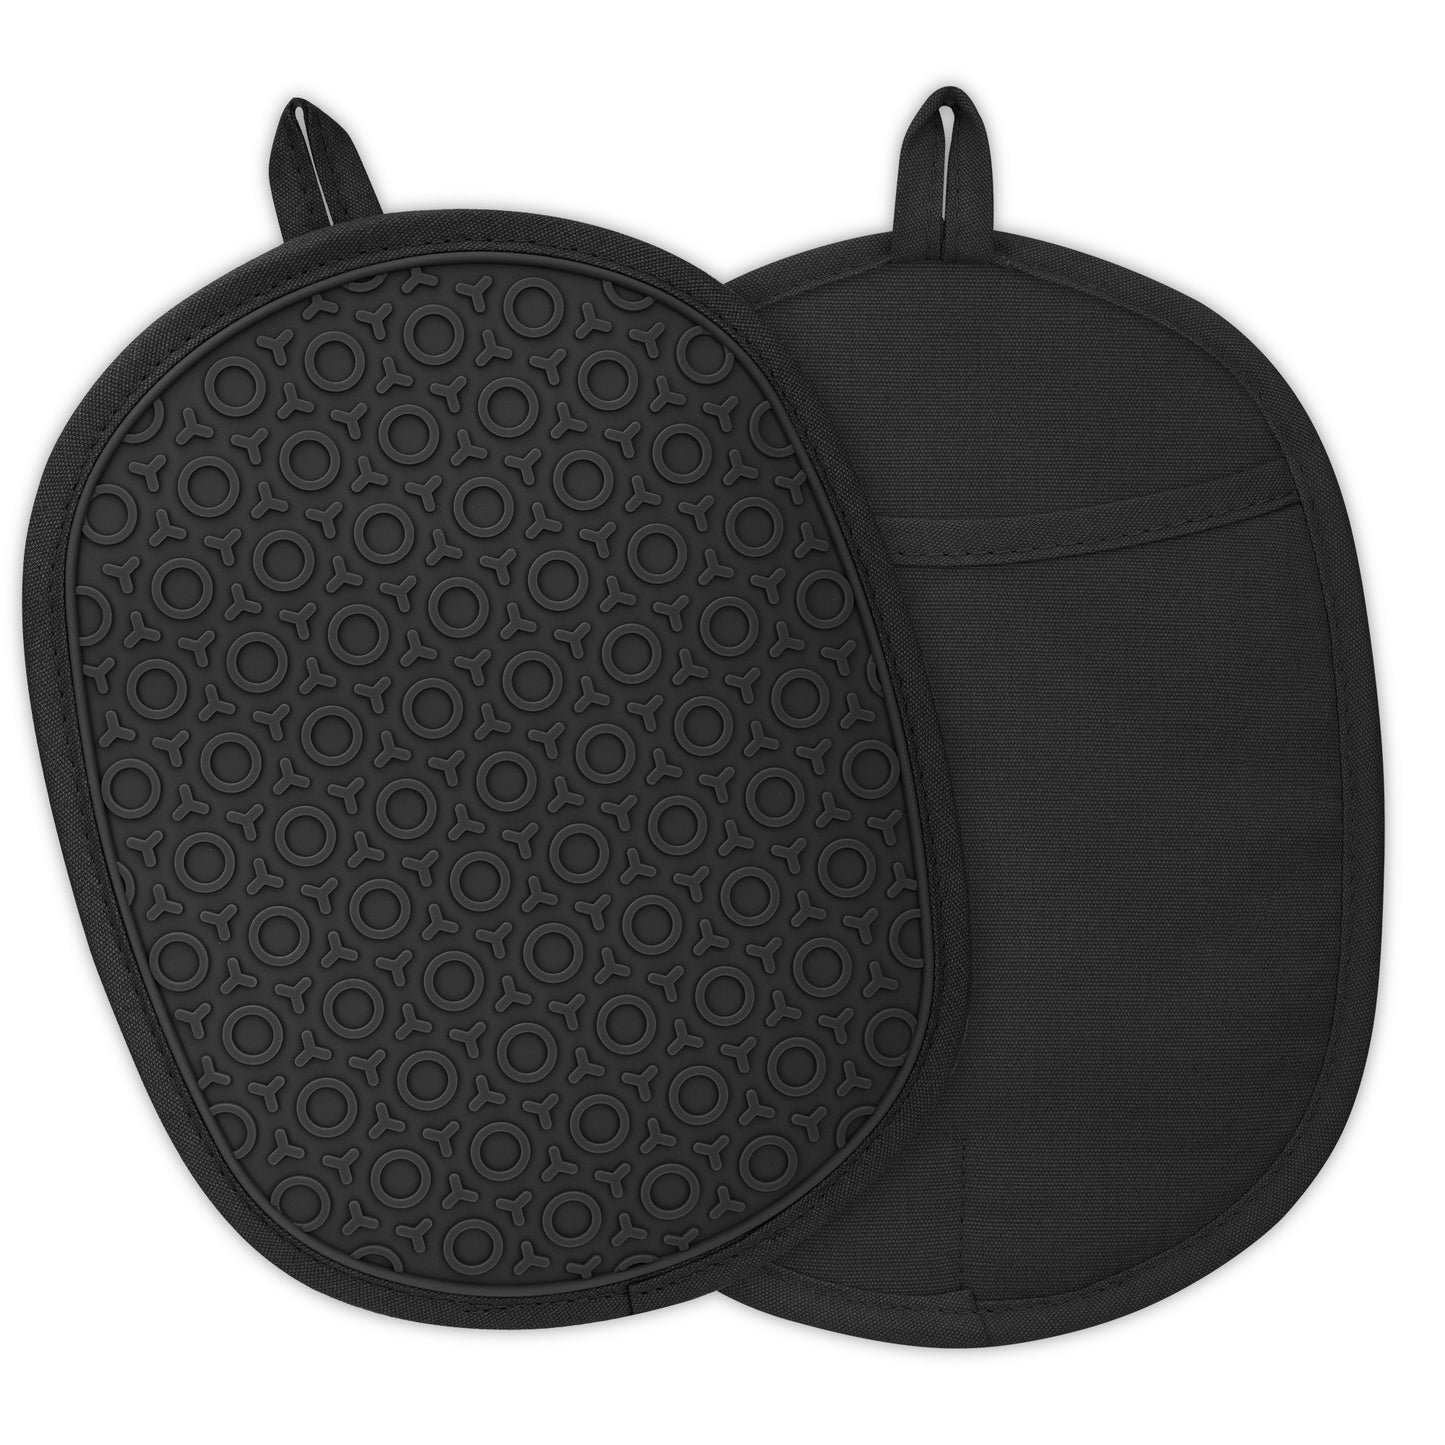 2pcs Silicone Pot Holders- Heat-Resistant Pads with Secure Pockets and Non-Slip Grip for Safe Baking and  Cooking(Black)